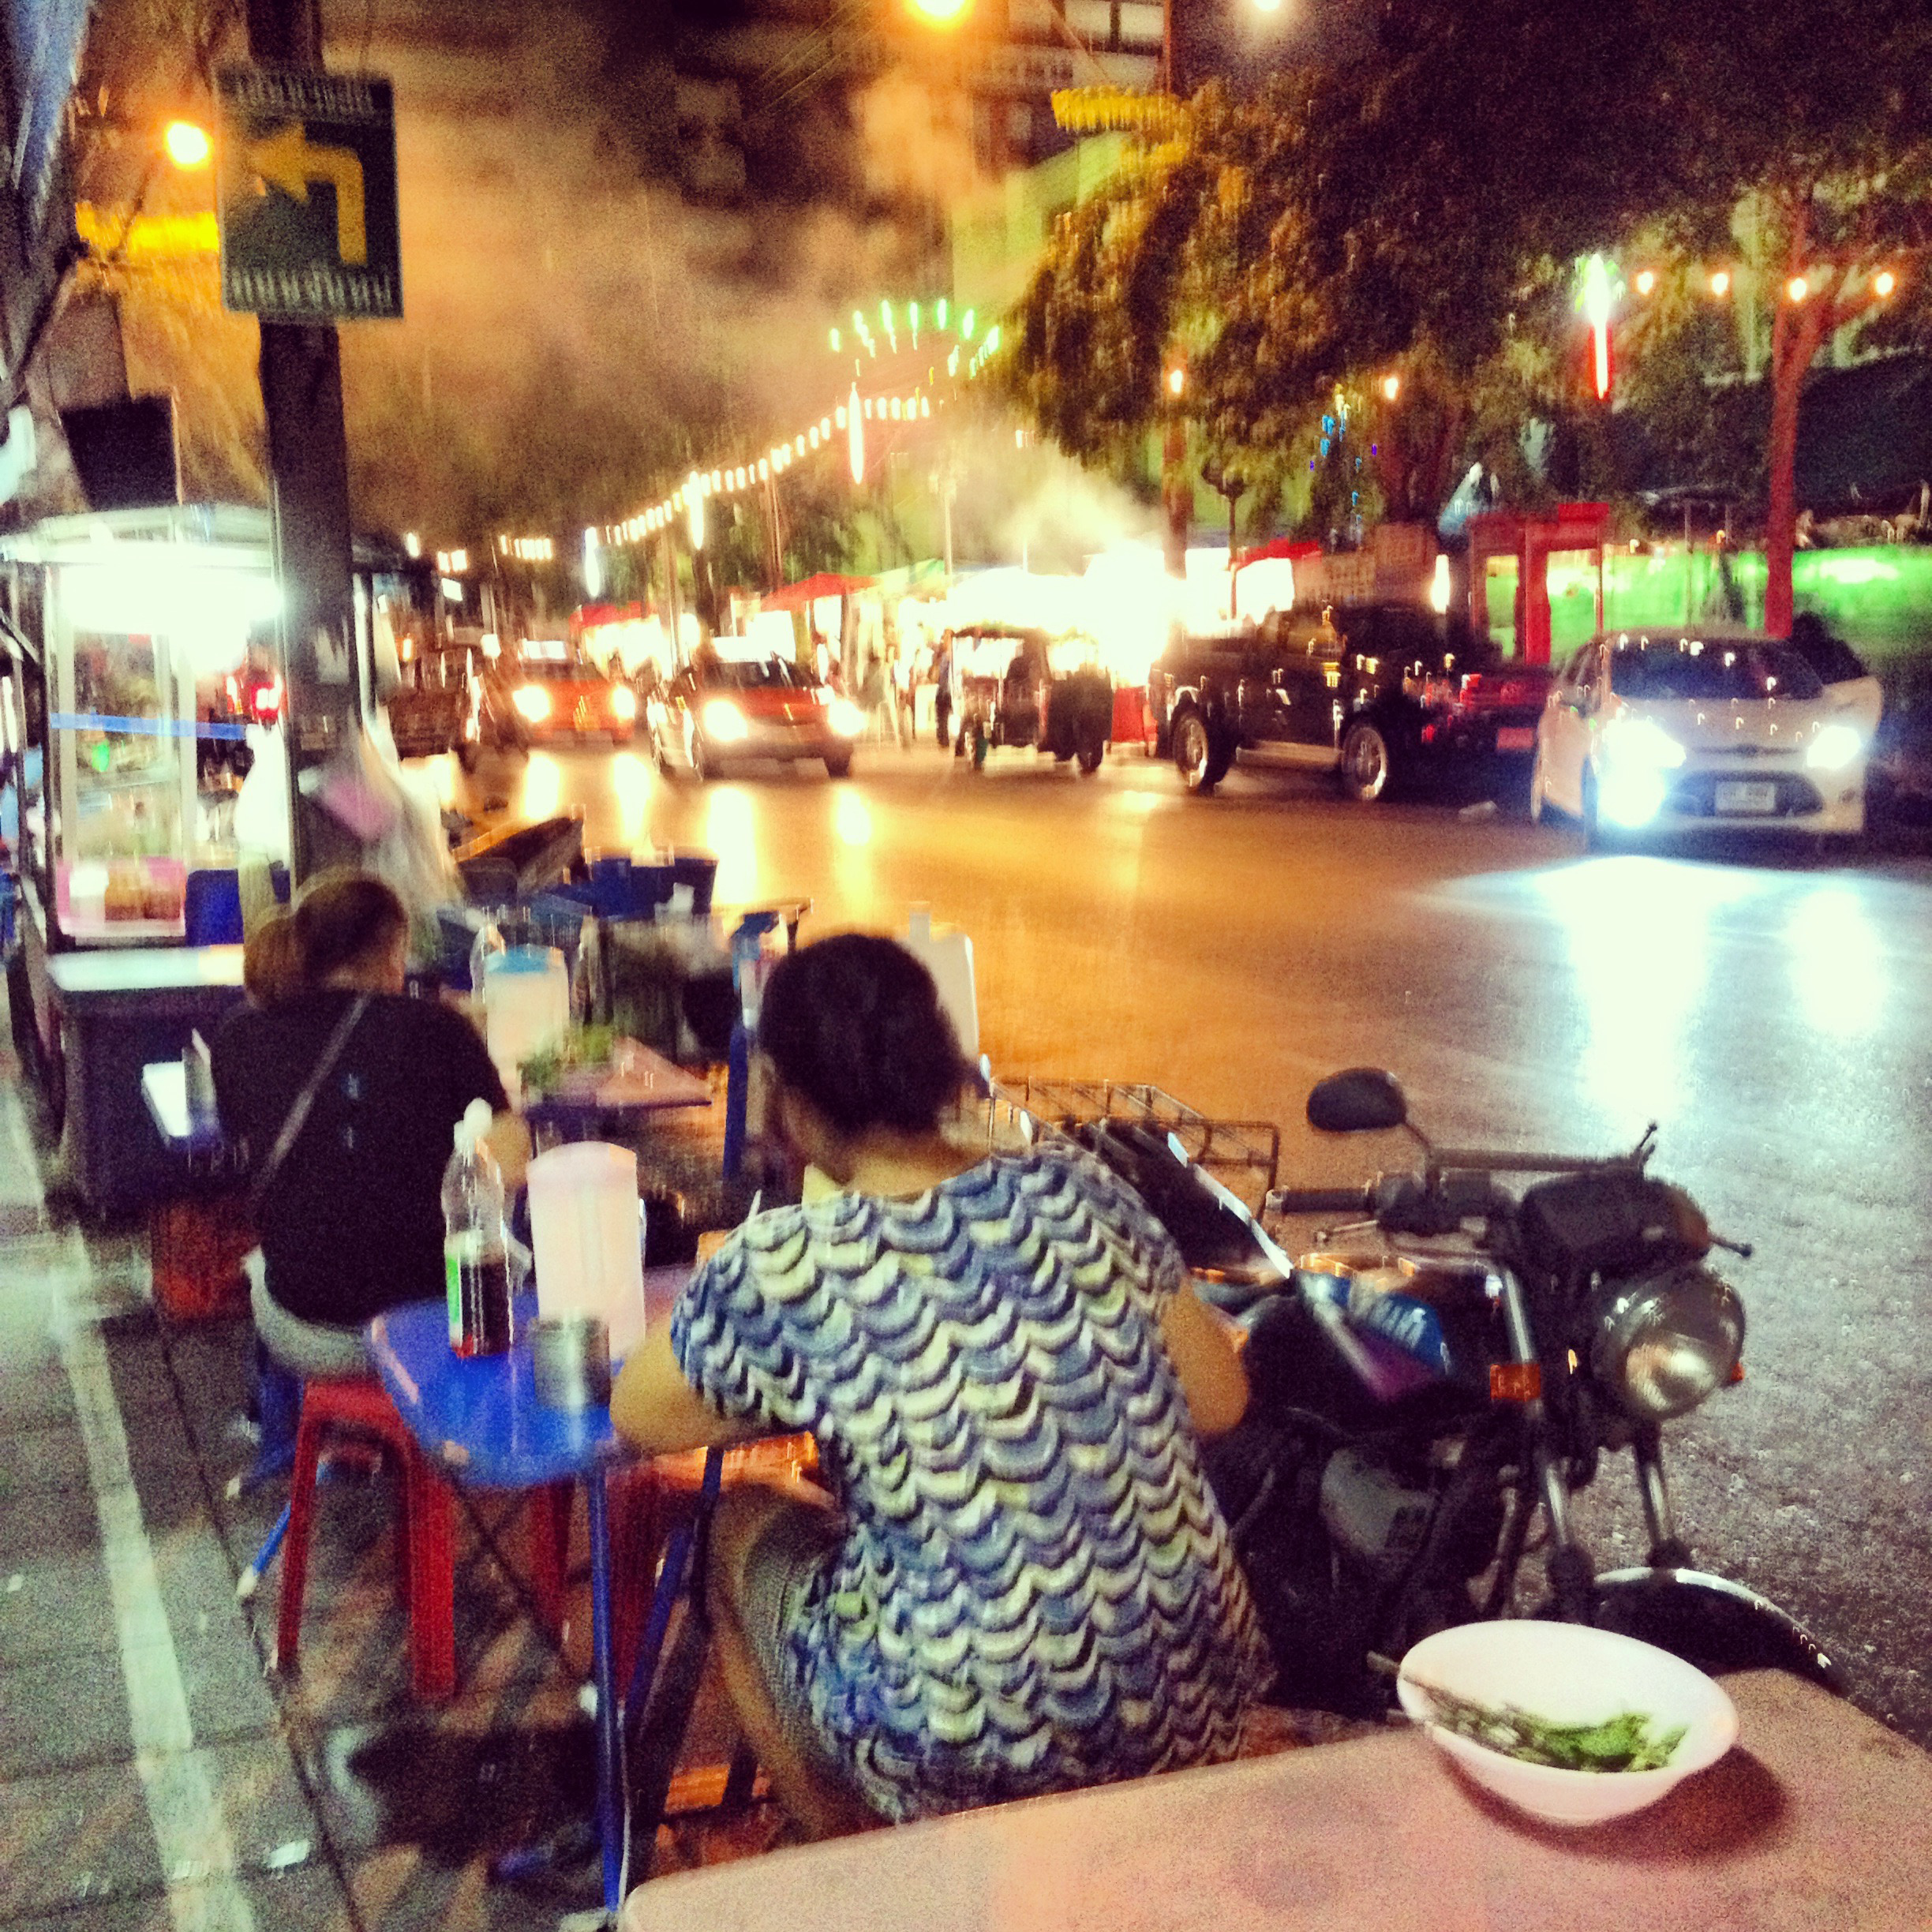 People eating at tables outside on a street in Bangkok.